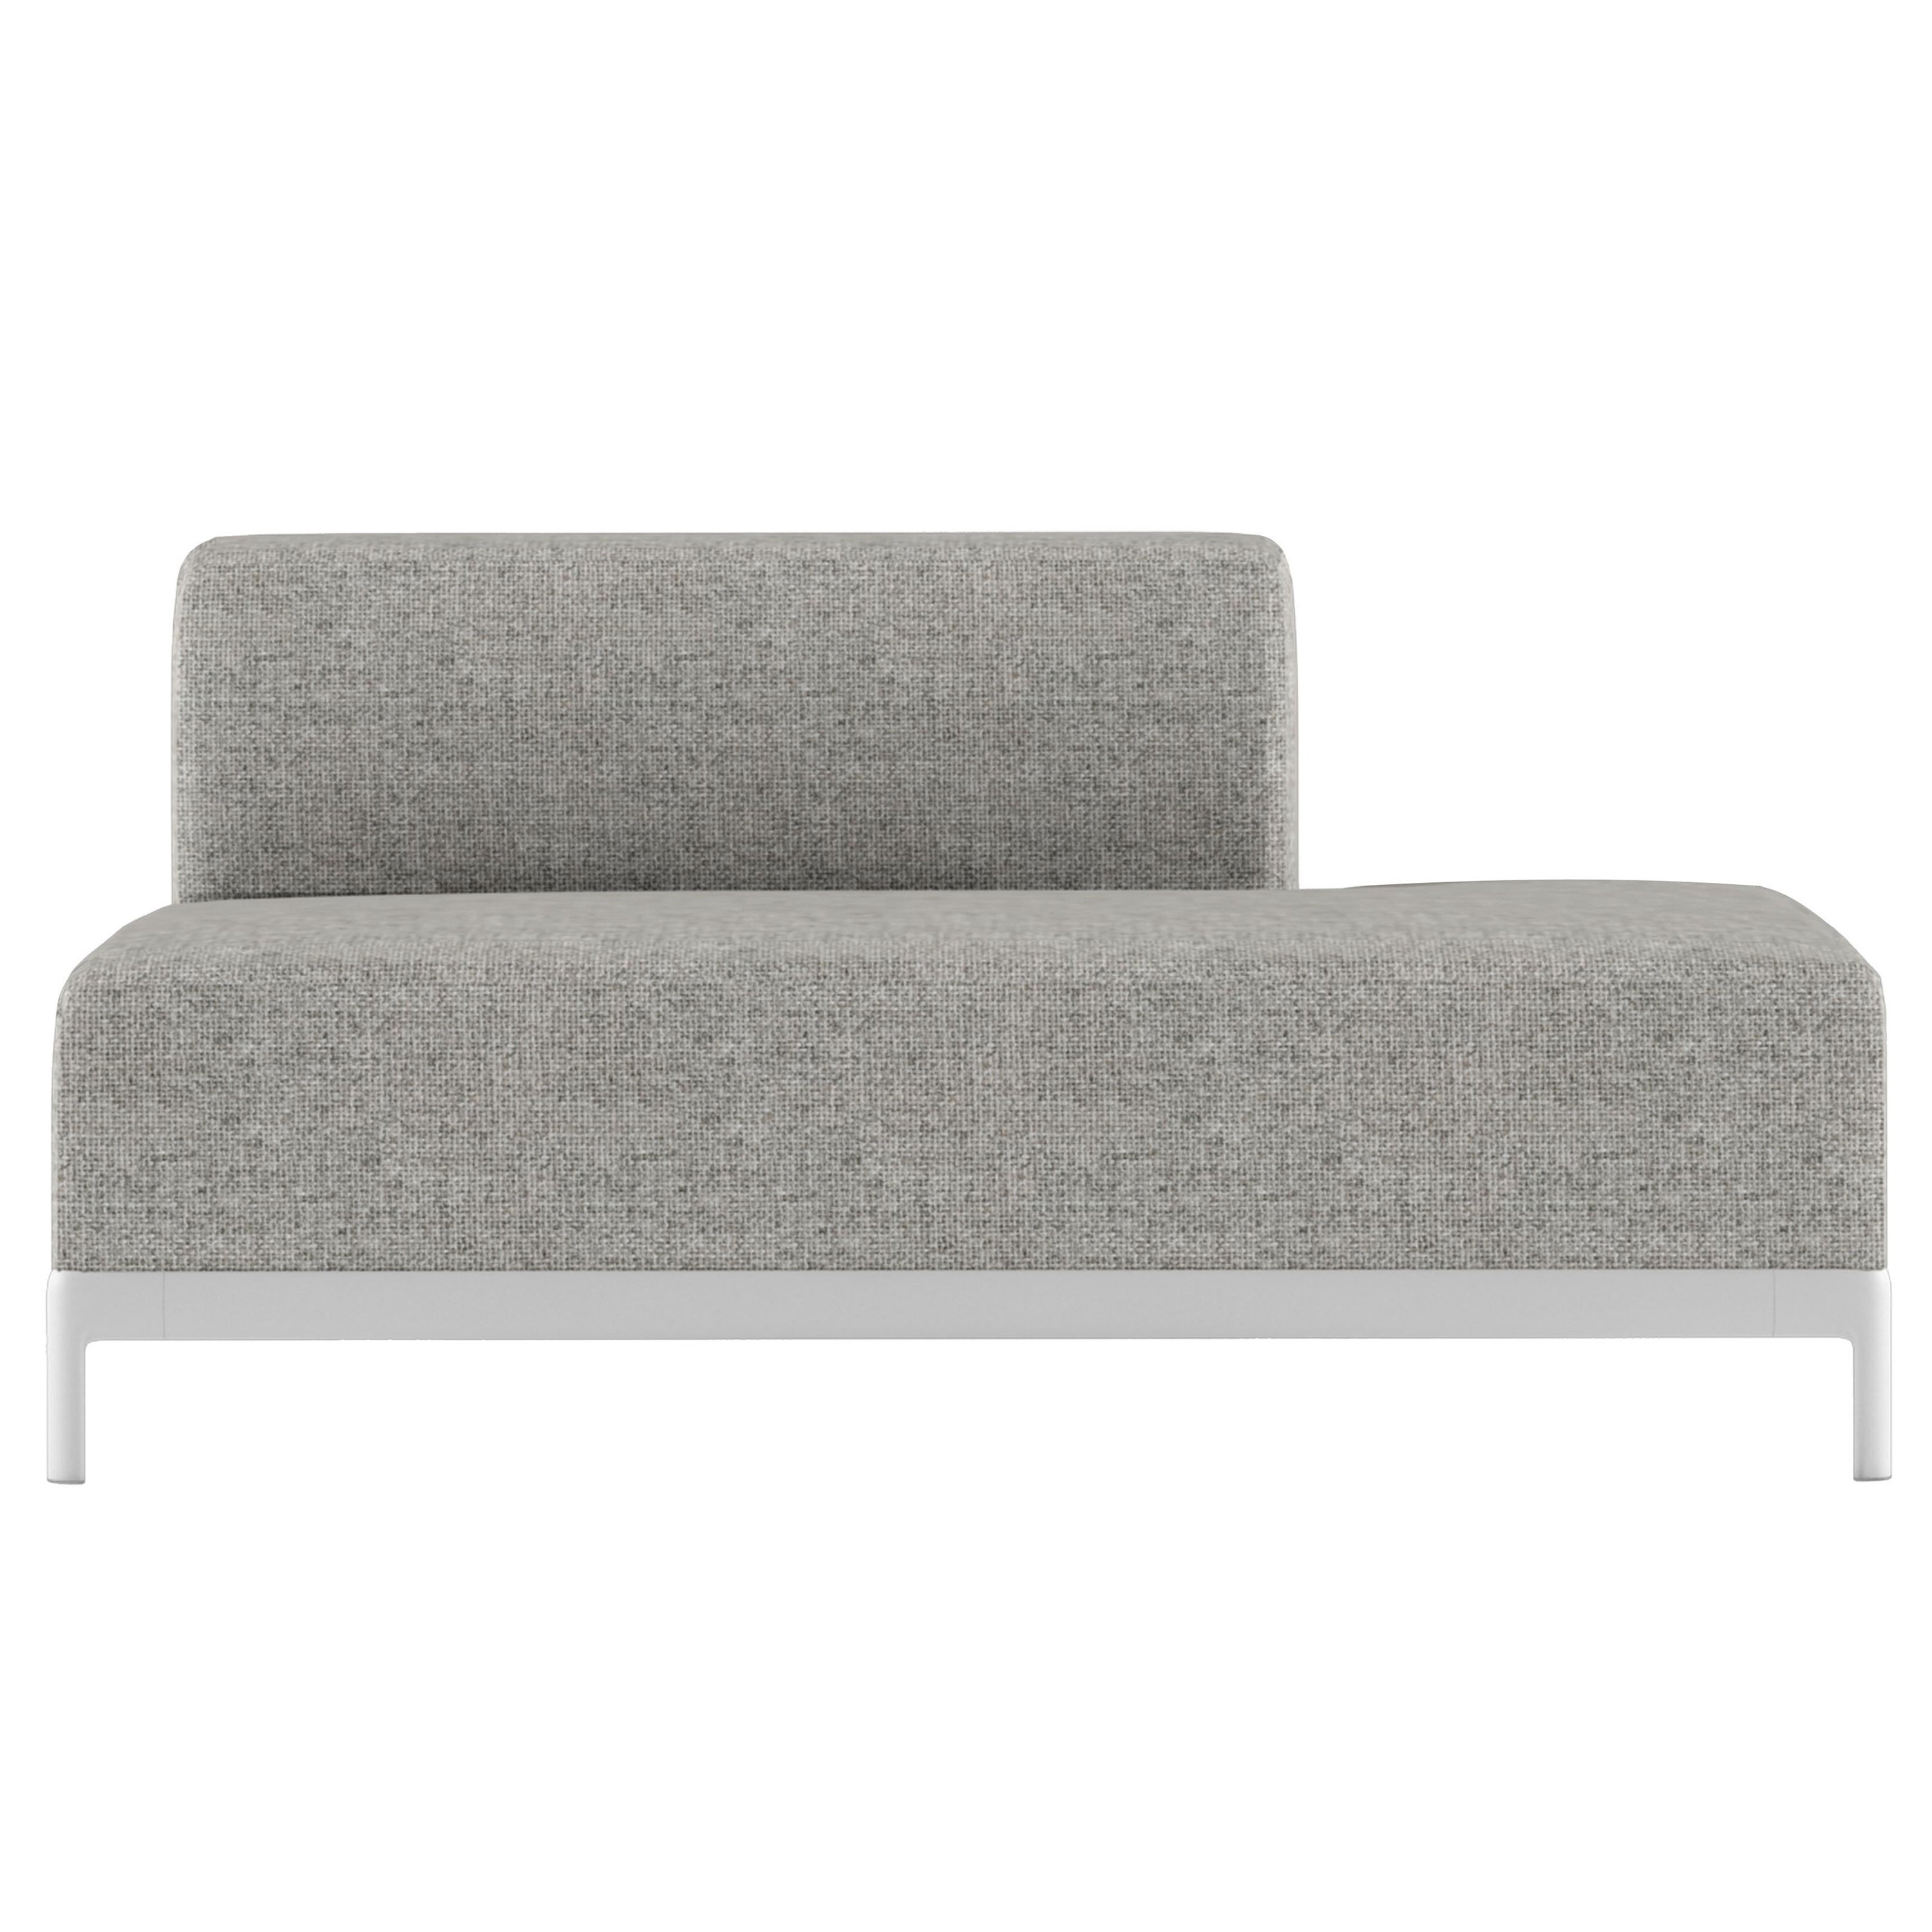 Alias P67 AluZen Soft Ending Sofa Outdoor DX in Upholstery with Aluminium Frame For Sale